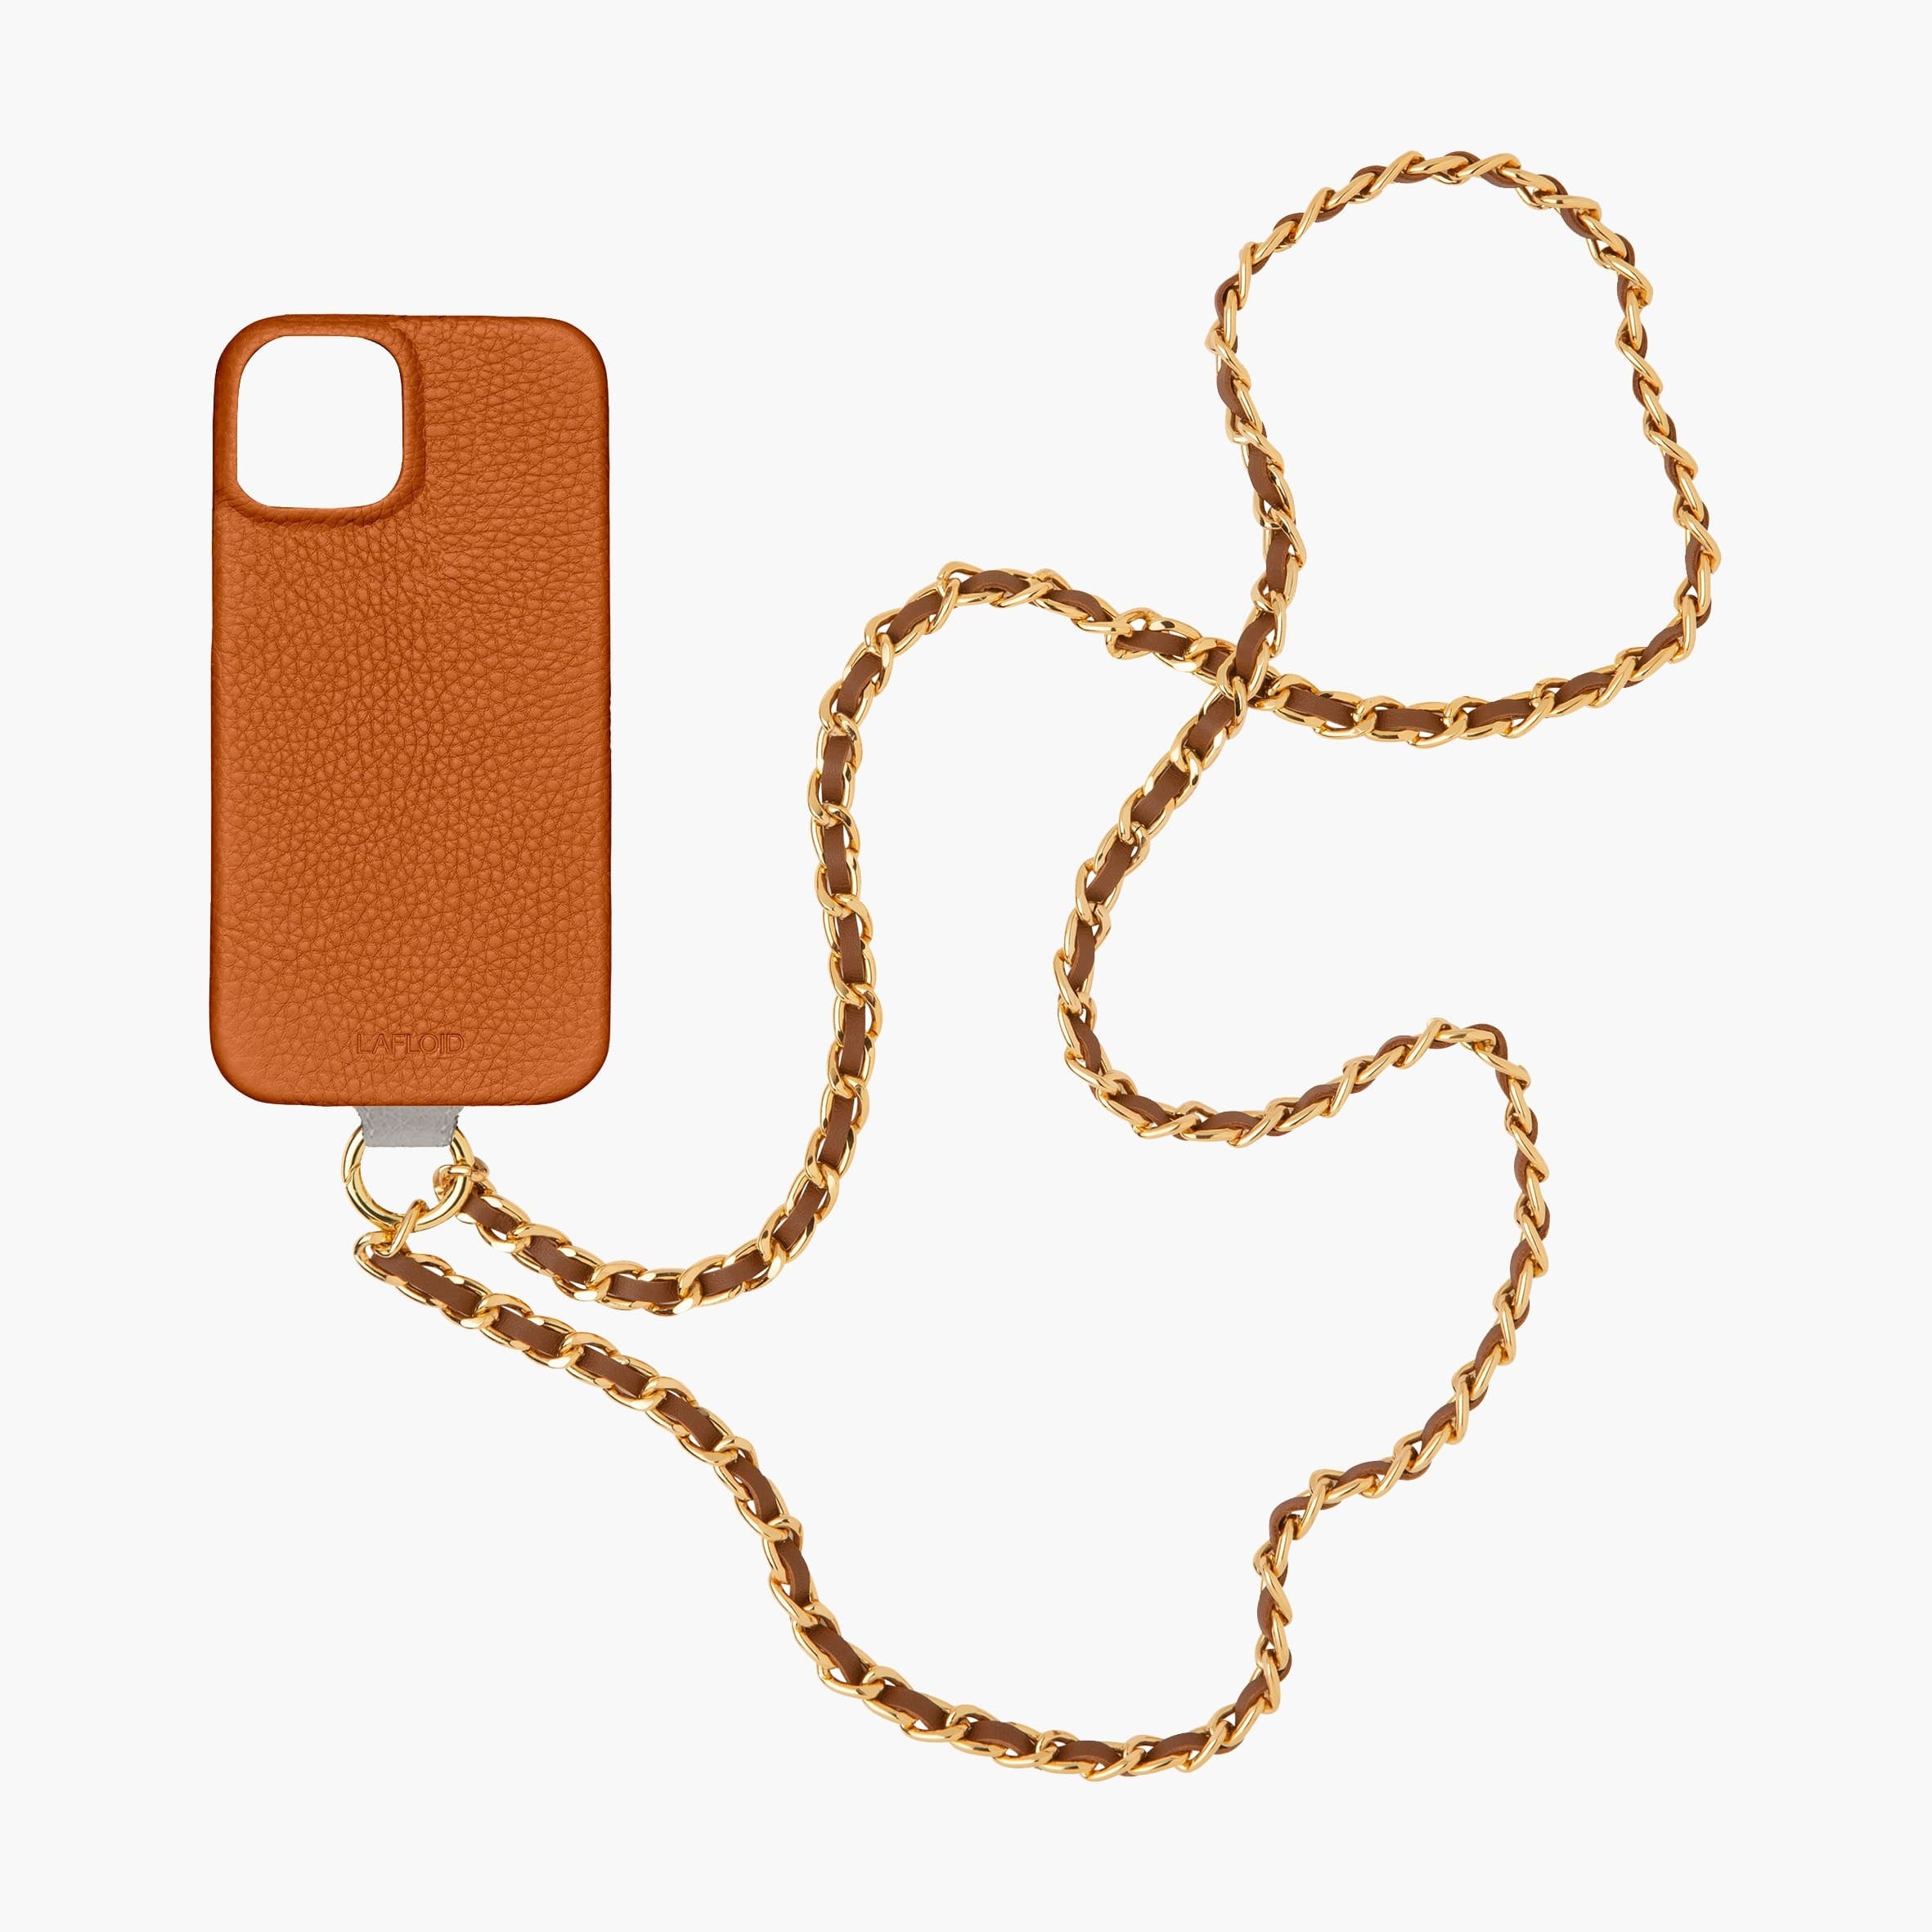 iPhone 12 PRO MAX Strap Case Pack  + Chain Strap